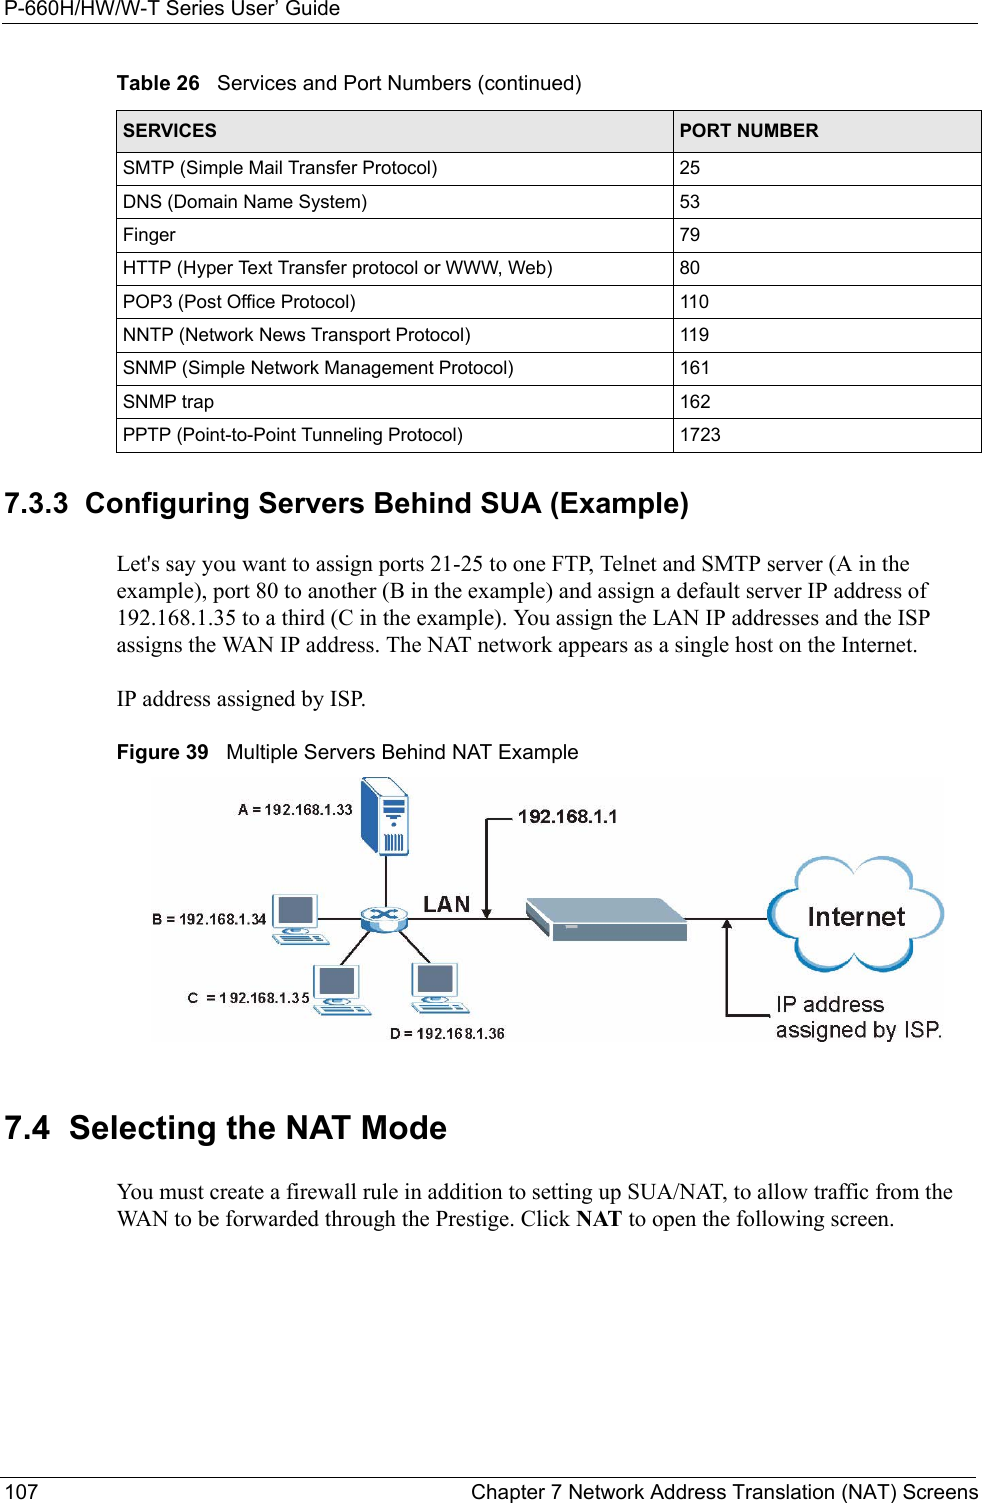 P-660H/HW/W-T Series User’ Guide107 Chapter 7 Network Address Translation (NAT) Screens7.3.3  Configuring Servers Behind SUA (Example)Let&apos;s say you want to assign ports 21-25 to one FTP, Telnet and SMTP server (A in the example), port 80 to another (B in the example) and assign a default server IP address of 192.168.1.35 to a third (C in the example). You assign the LAN IP addresses and the ISP assigns the WAN IP address. The NAT network appears as a single host on the Internet.IP address assigned by ISP.Figure 39   Multiple Servers Behind NAT Example7.4  Selecting the NAT Mode You must create a firewall rule in addition to setting up SUA/NAT, to allow traffic from the WAN to be forwarded through the Prestige. Click NAT to open the following screen.  SMTP (Simple Mail Transfer Protocol) 25DNS (Domain Name System) 53Finger 79HTTP (Hyper Text Transfer protocol or WWW, Web) 80POP3 (Post Office Protocol) 110NNTP (Network News Transport Protocol) 119SNMP (Simple Network Management Protocol) 161SNMP trap 162PPTP (Point-to-Point Tunneling Protocol) 1723Table 26   Services and Port Numbers (continued)SERVICES PORT NUMBER